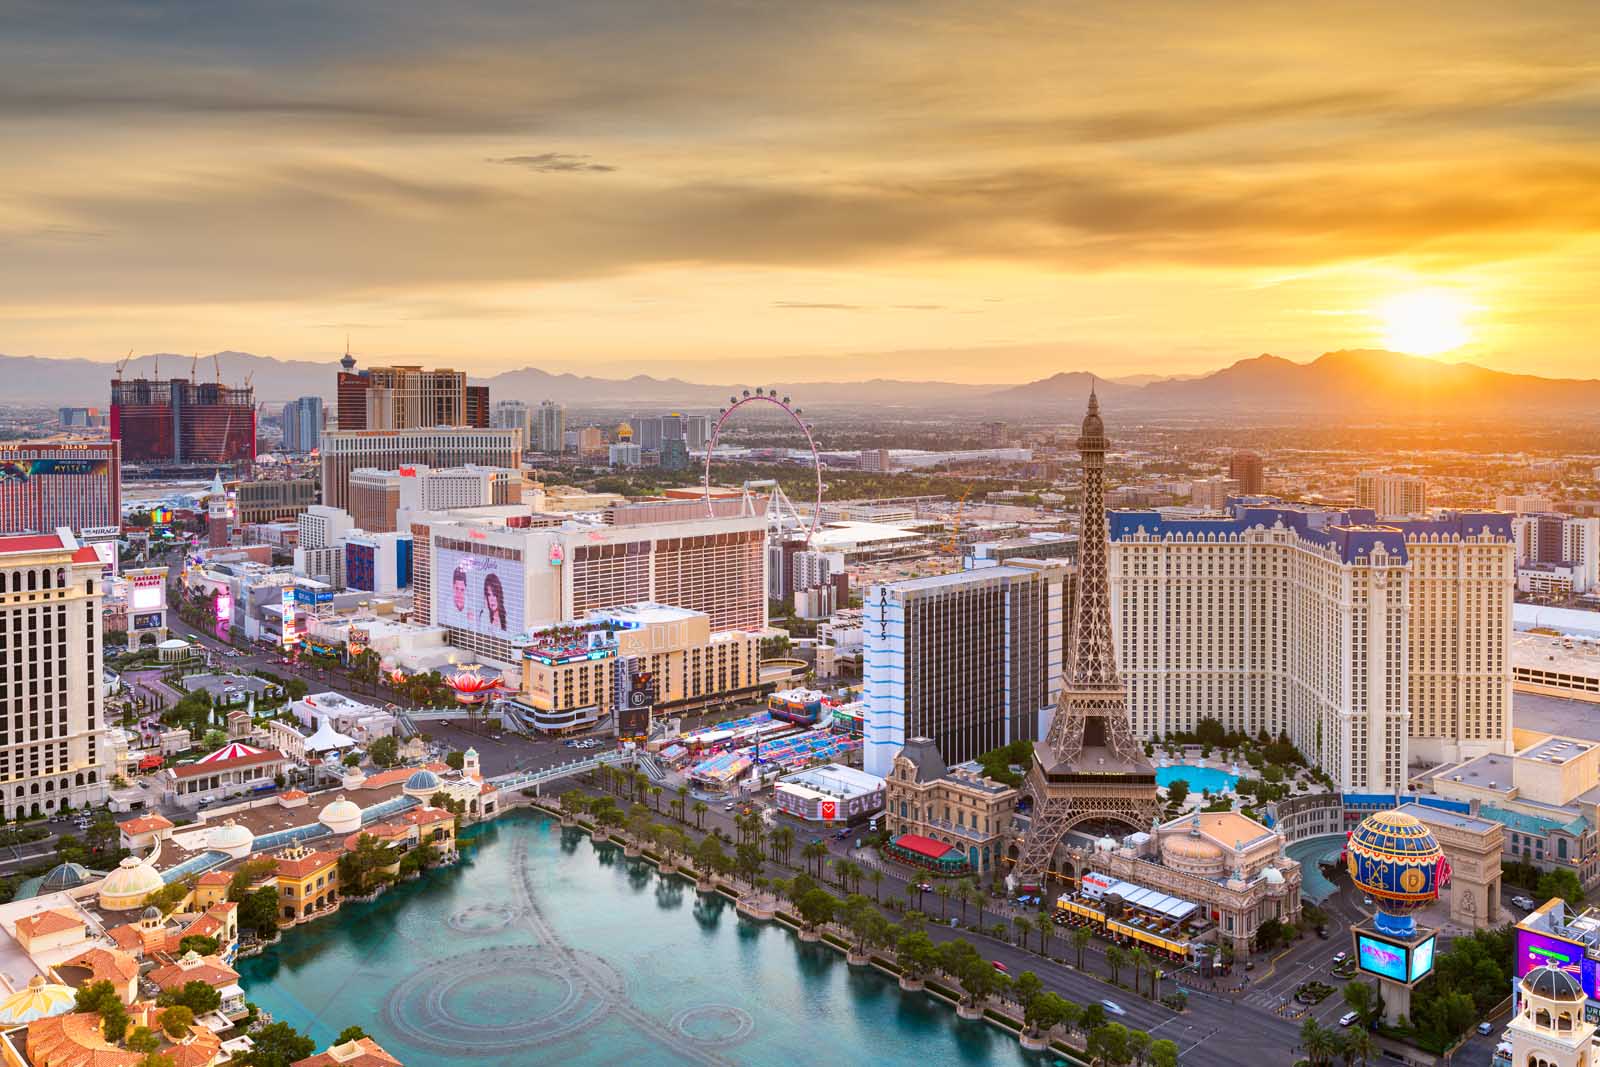 Where to Stay in Las Vegas: Best Places and Areas for 2023